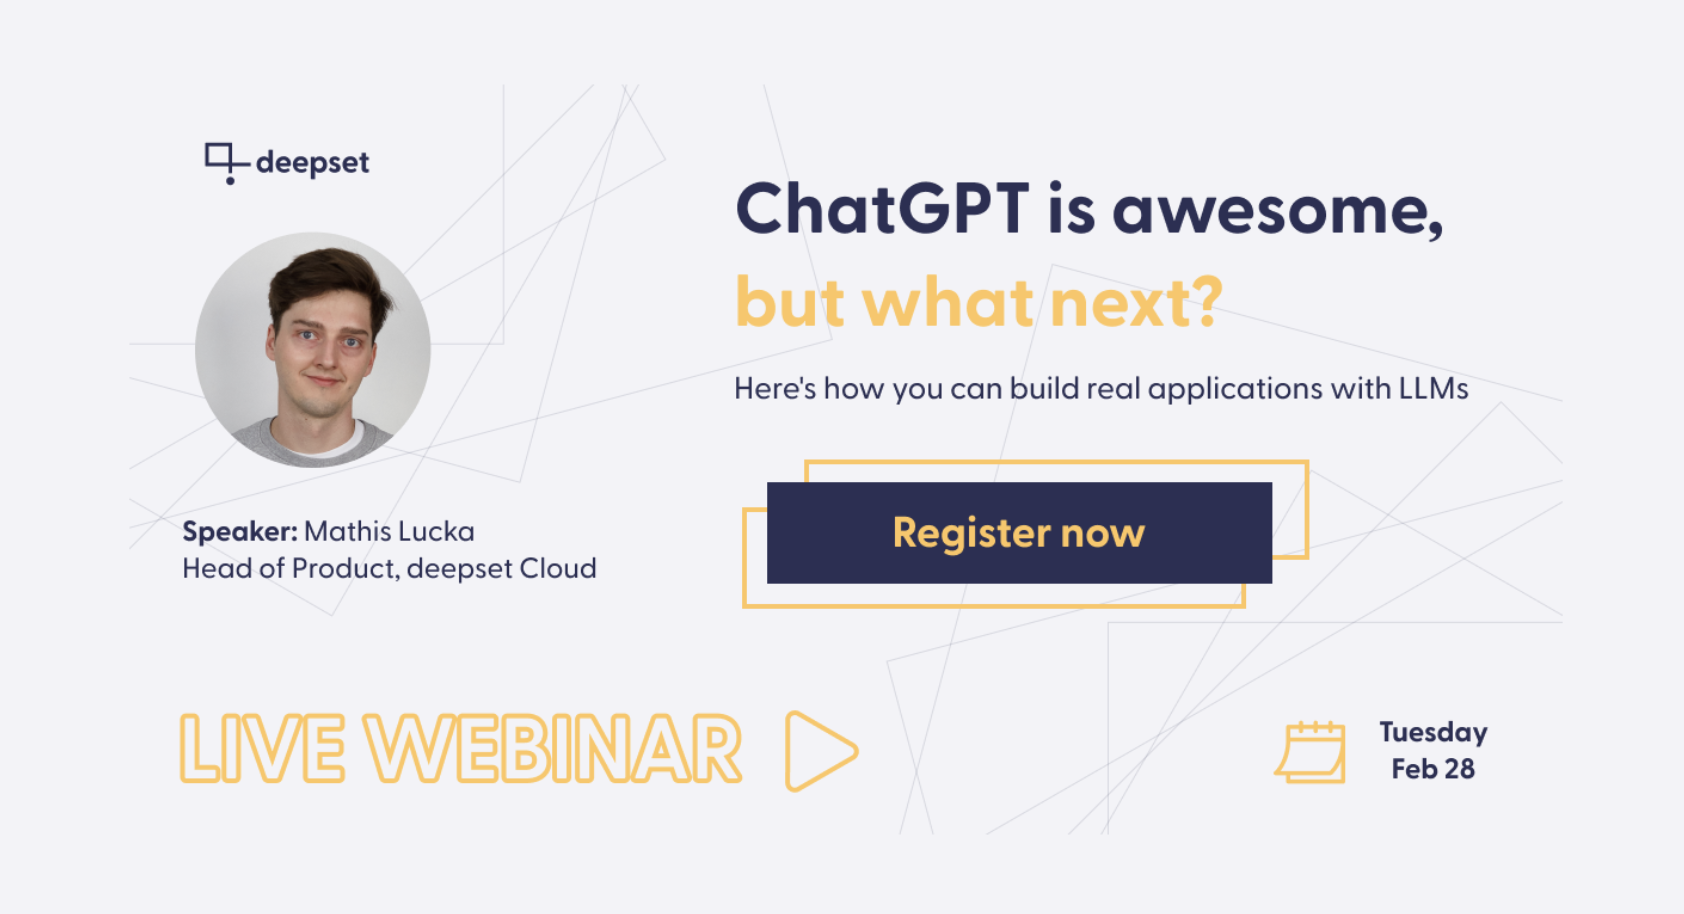 ChatGPT is awesome, but what next?
